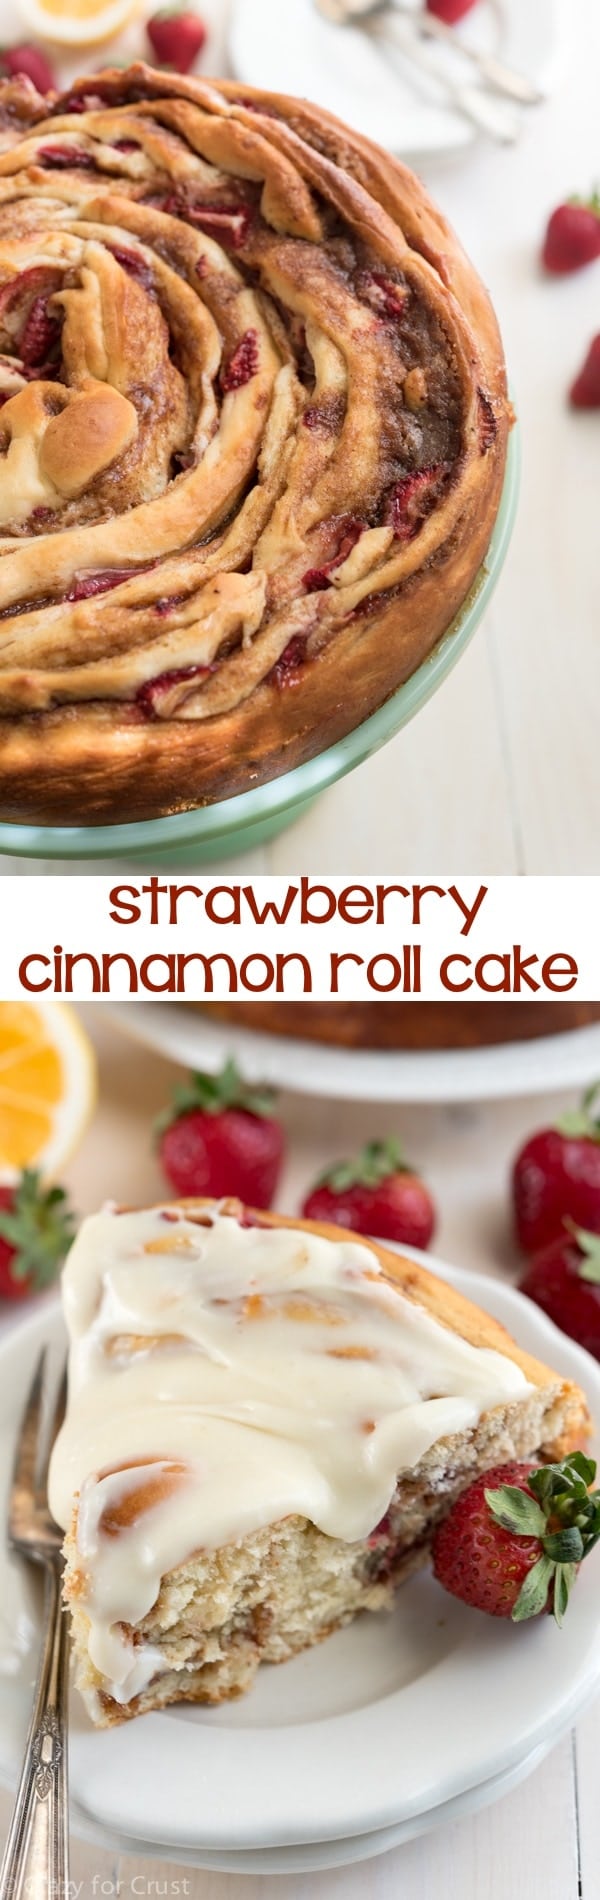 This Giant Strawberry Cinnamon Roll Cake Recipe is perfect for breakfast or brunch. My favorite cinnamon roll recipe is filled with fresh strawberries and then rolled up like a cake and frosted with lemon icing!